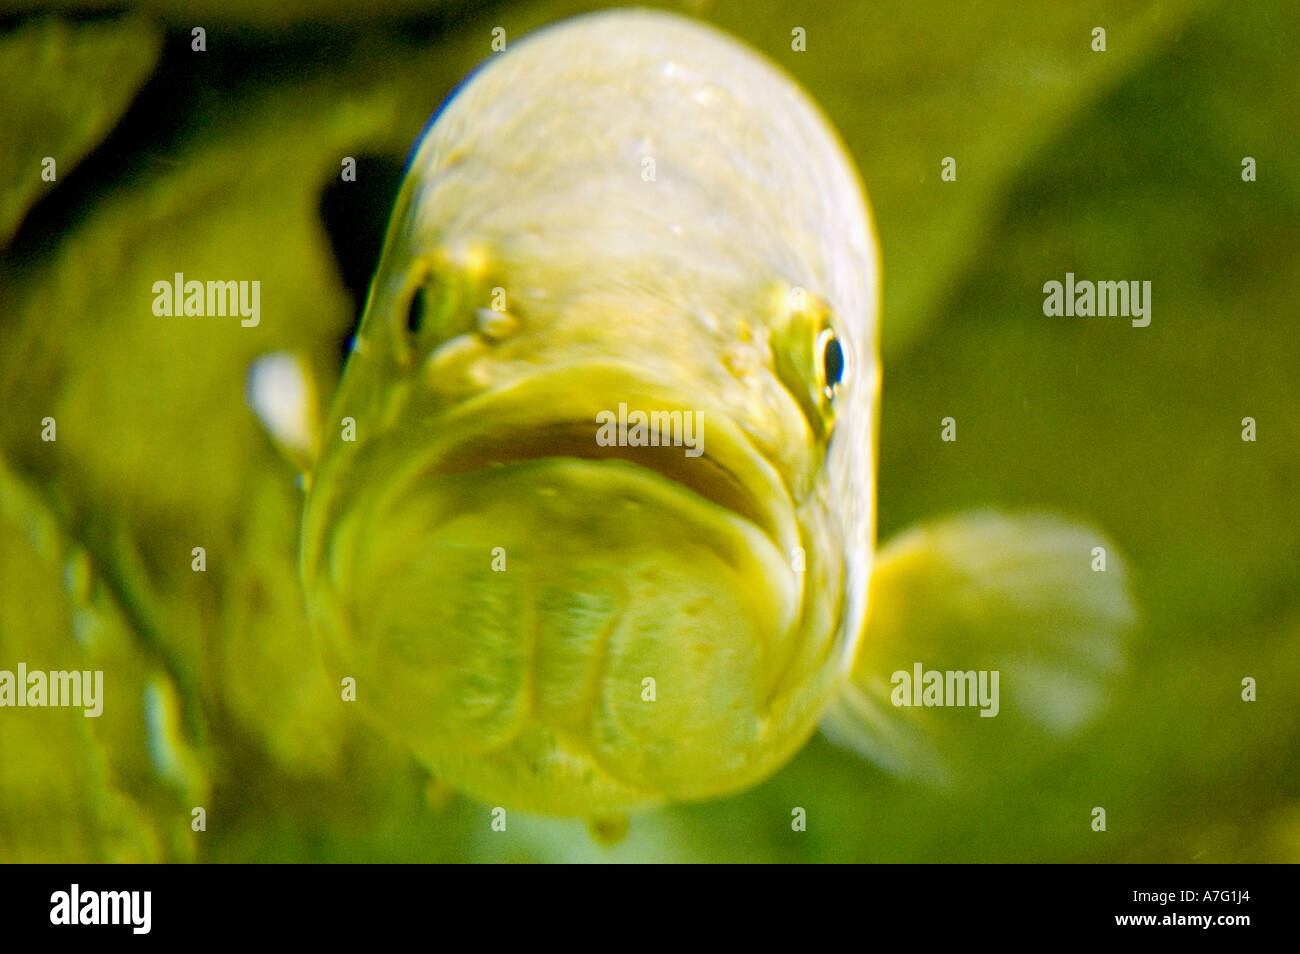 Funny goofy fish with strange expression on its face Stock Photo - Alamy